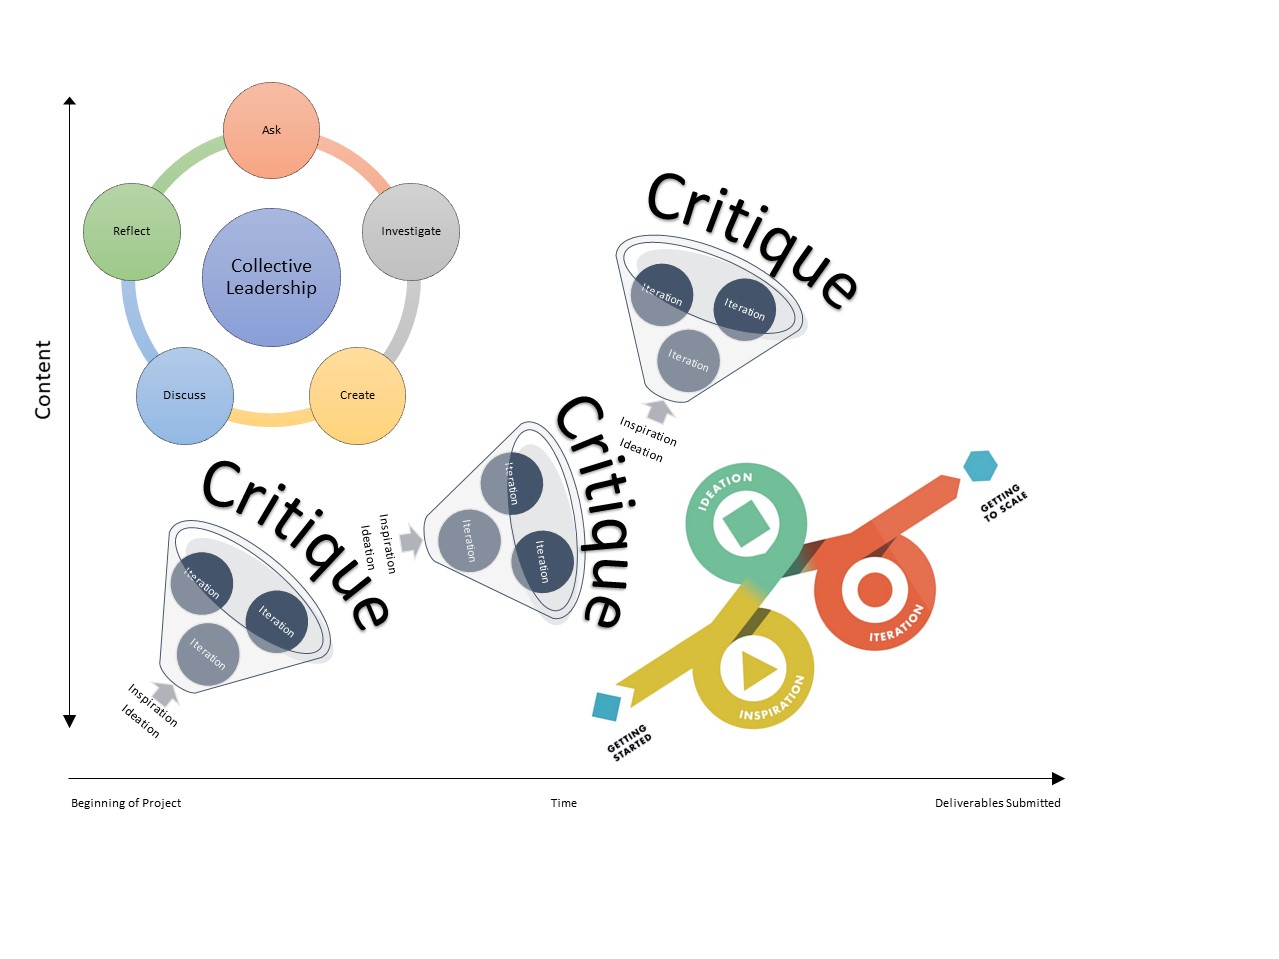 A graph. The X-axis is labelled time, from the beginning of a project to deliverables submitted. The Y-axis is labelled content. At the upper left, the phrase collective leadership is surrounded by the words ask, investigate, create, discuss, and reflect. Moving up and to the right, inspiration and ideation feed into iterative critiques three times, demonstrating the evolution of ideas through studio collaboration and design thinking.